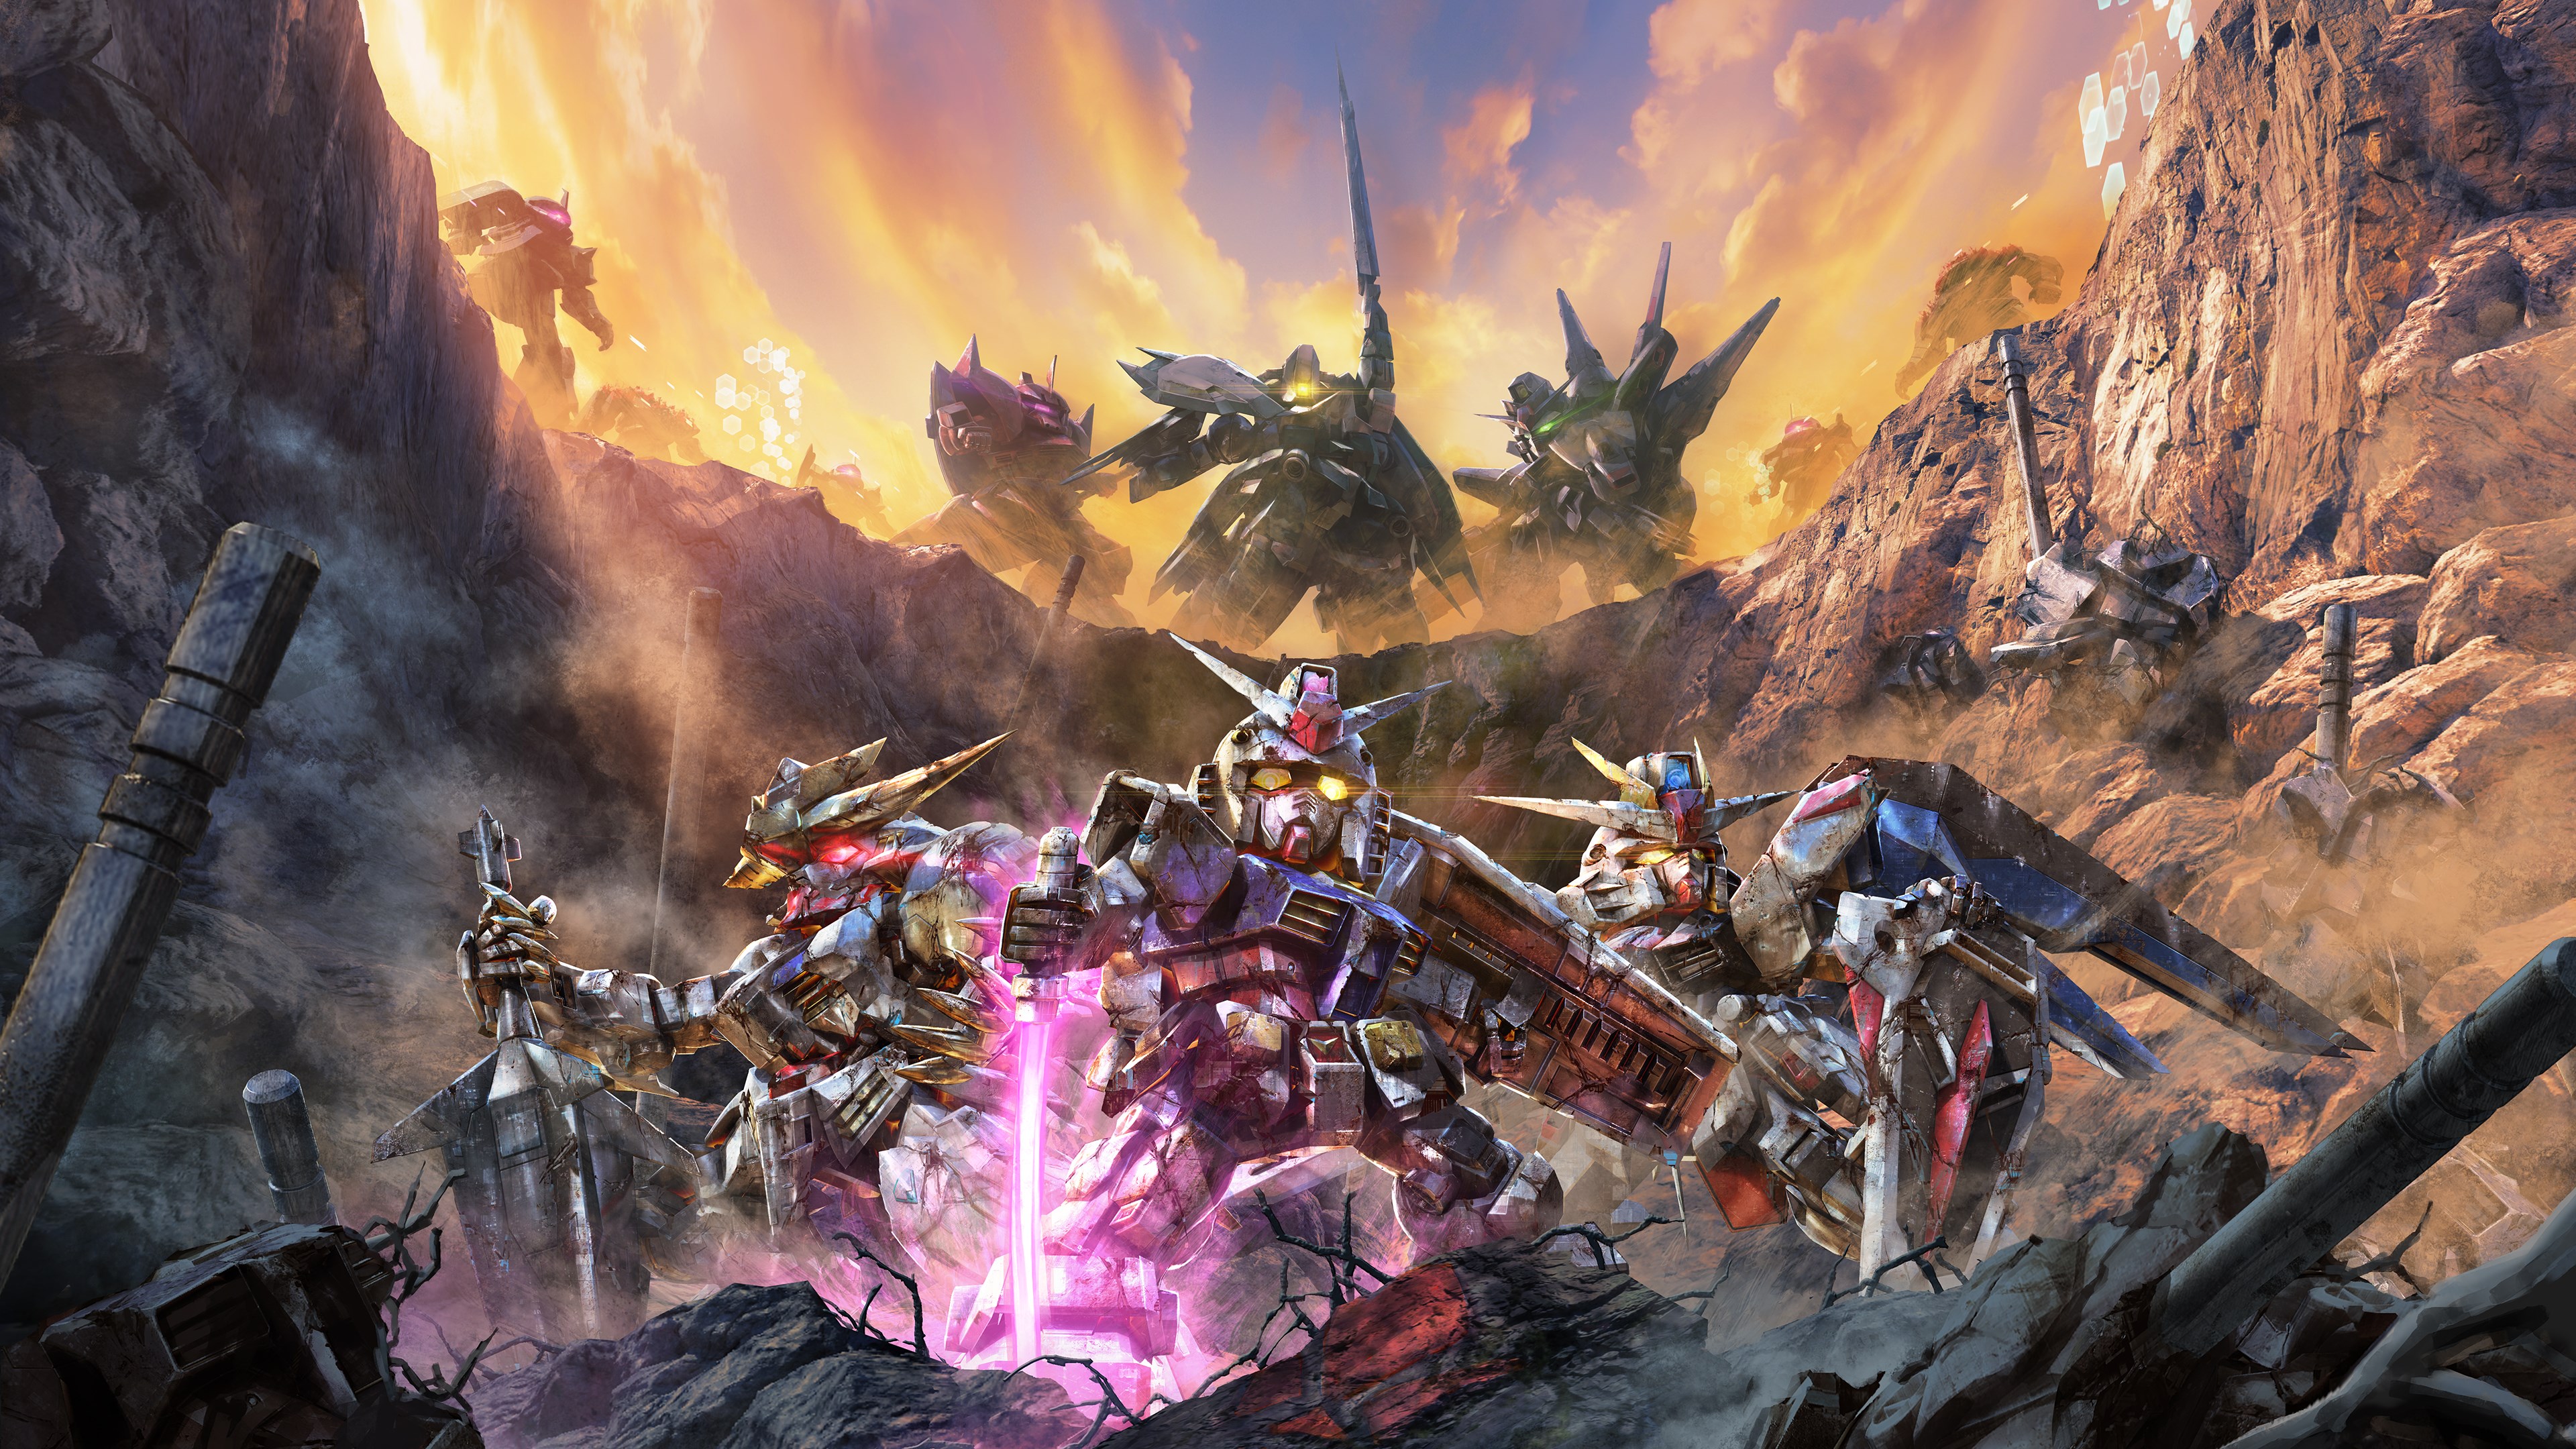 Video For SD GUNDAM BATTLE ALLIANCE Is Now Available For Digital Pre-order And Pre-download On PC, Xbox One, And Xbox Series X|S